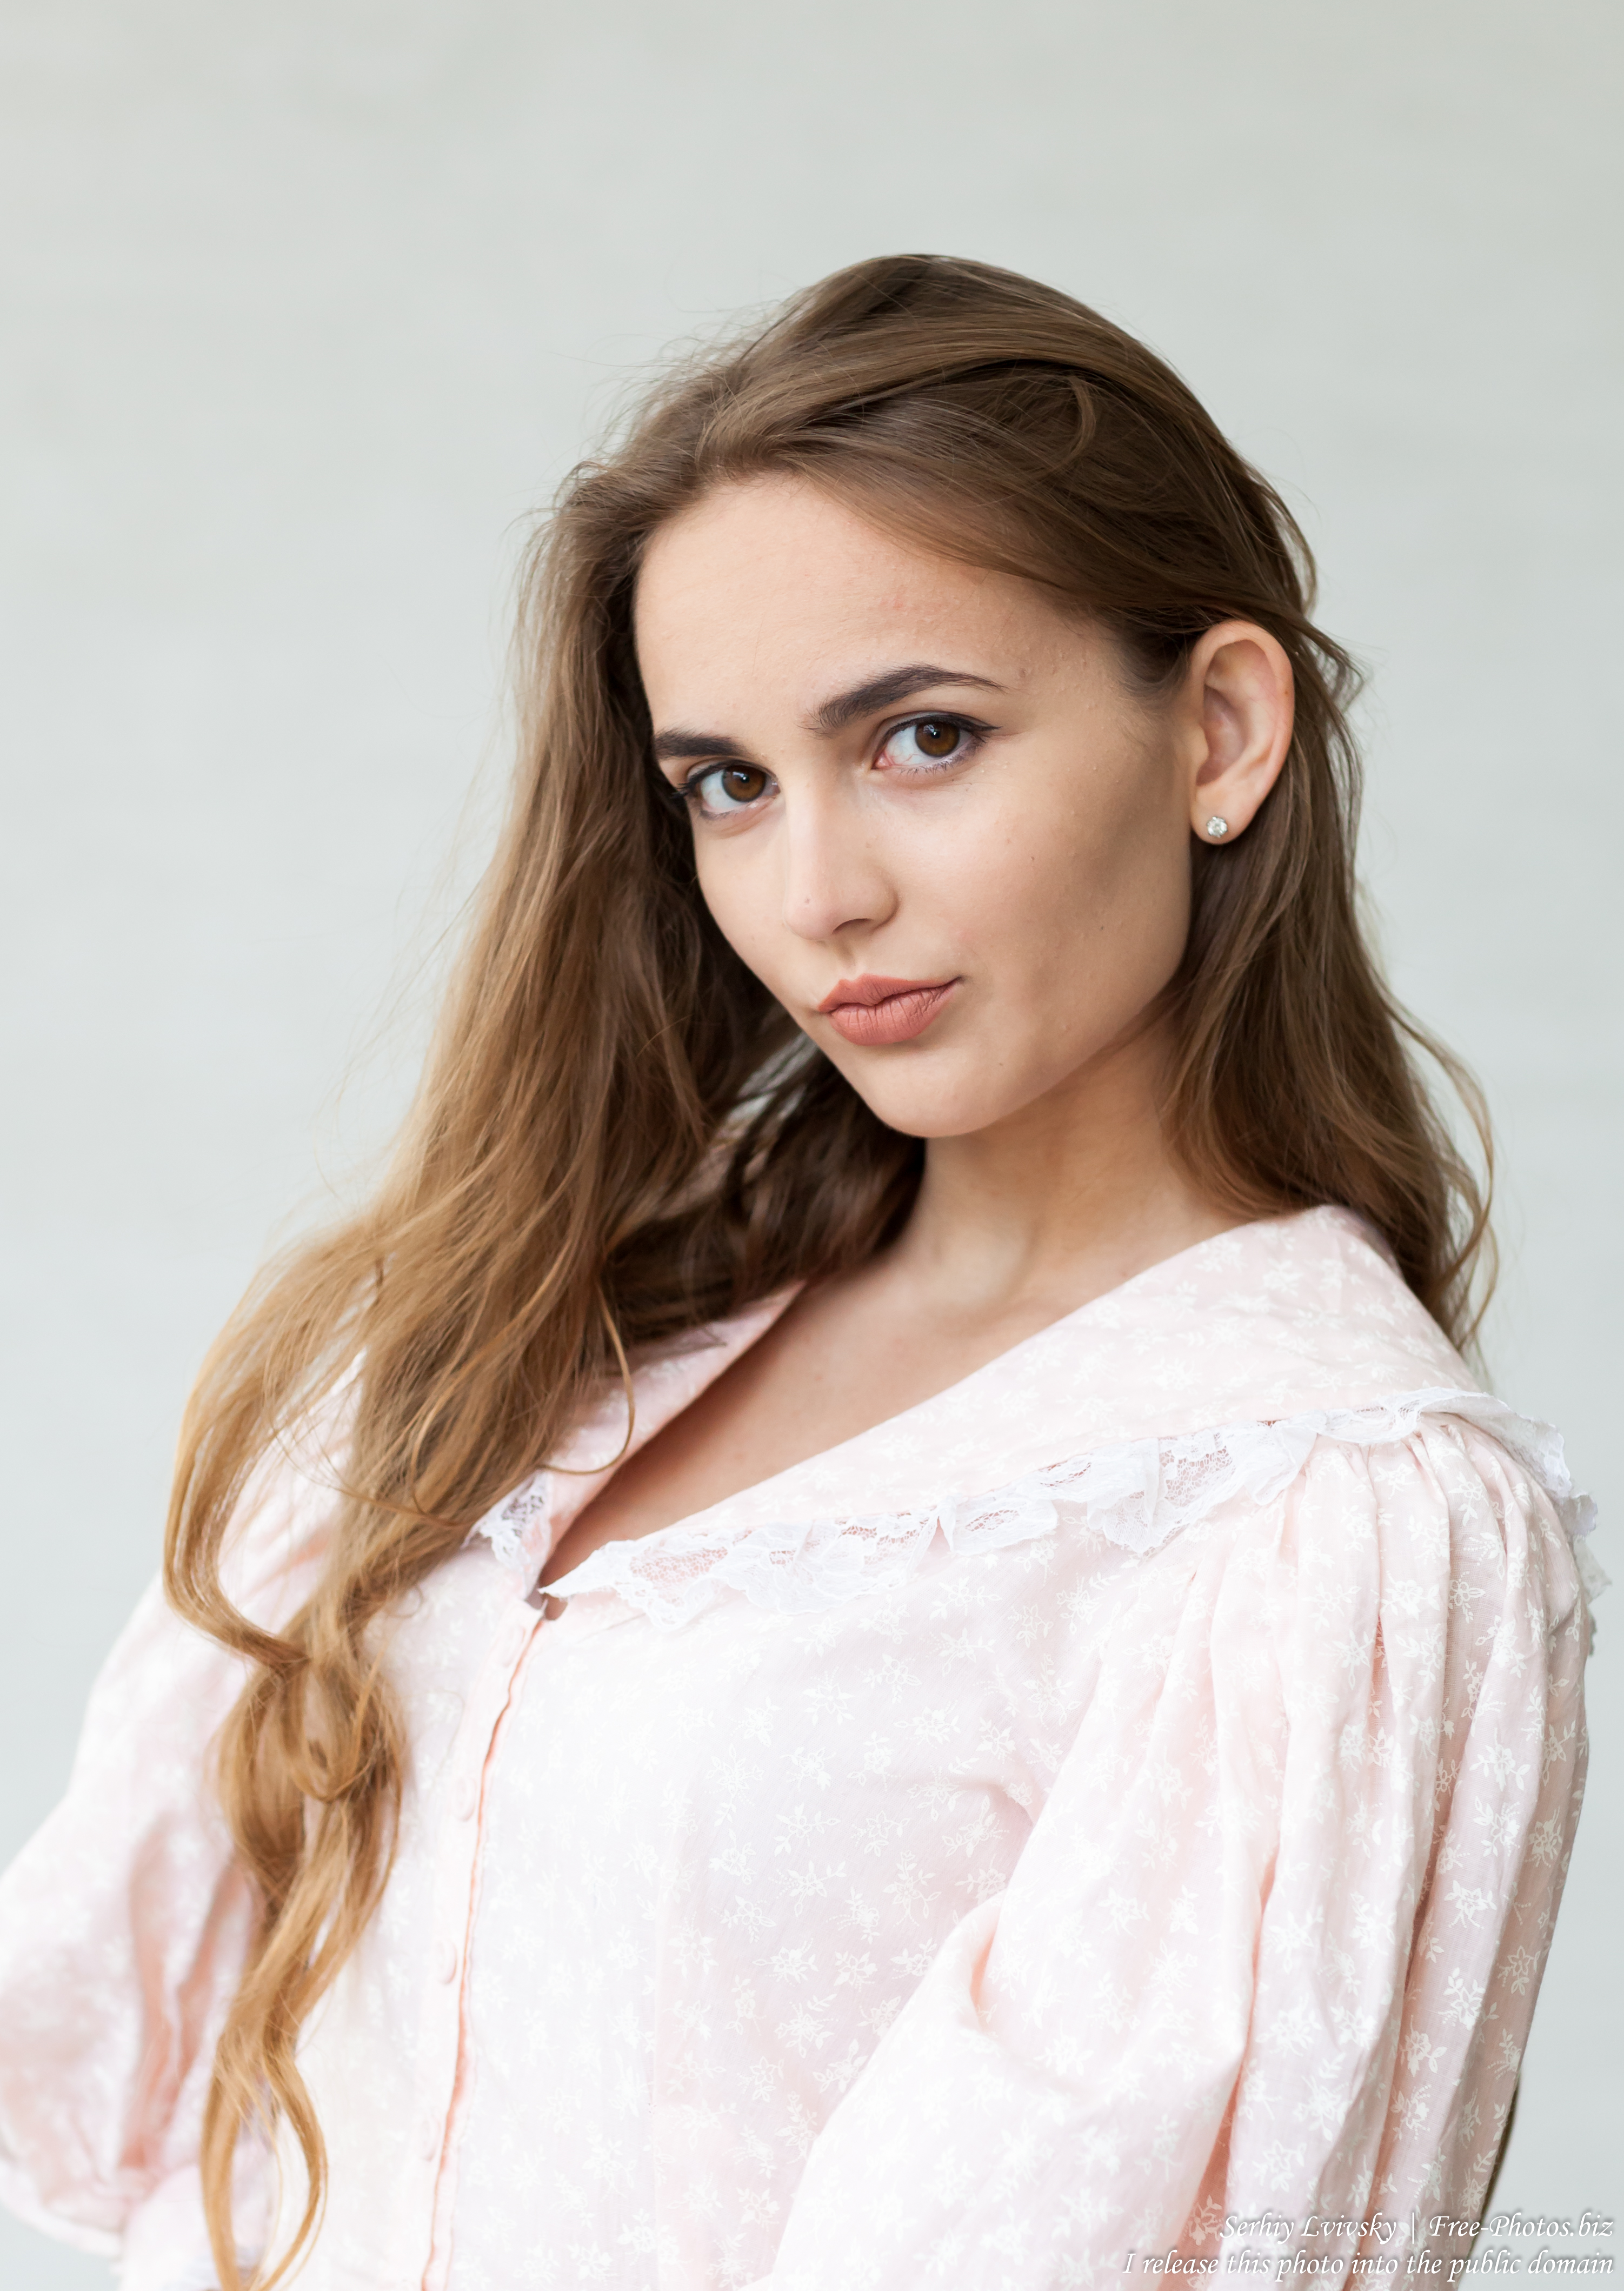 Vika - a 19-year-old girl with natural fair hair photographed in June 2017 by Serhiy Lvivsky, picture 3